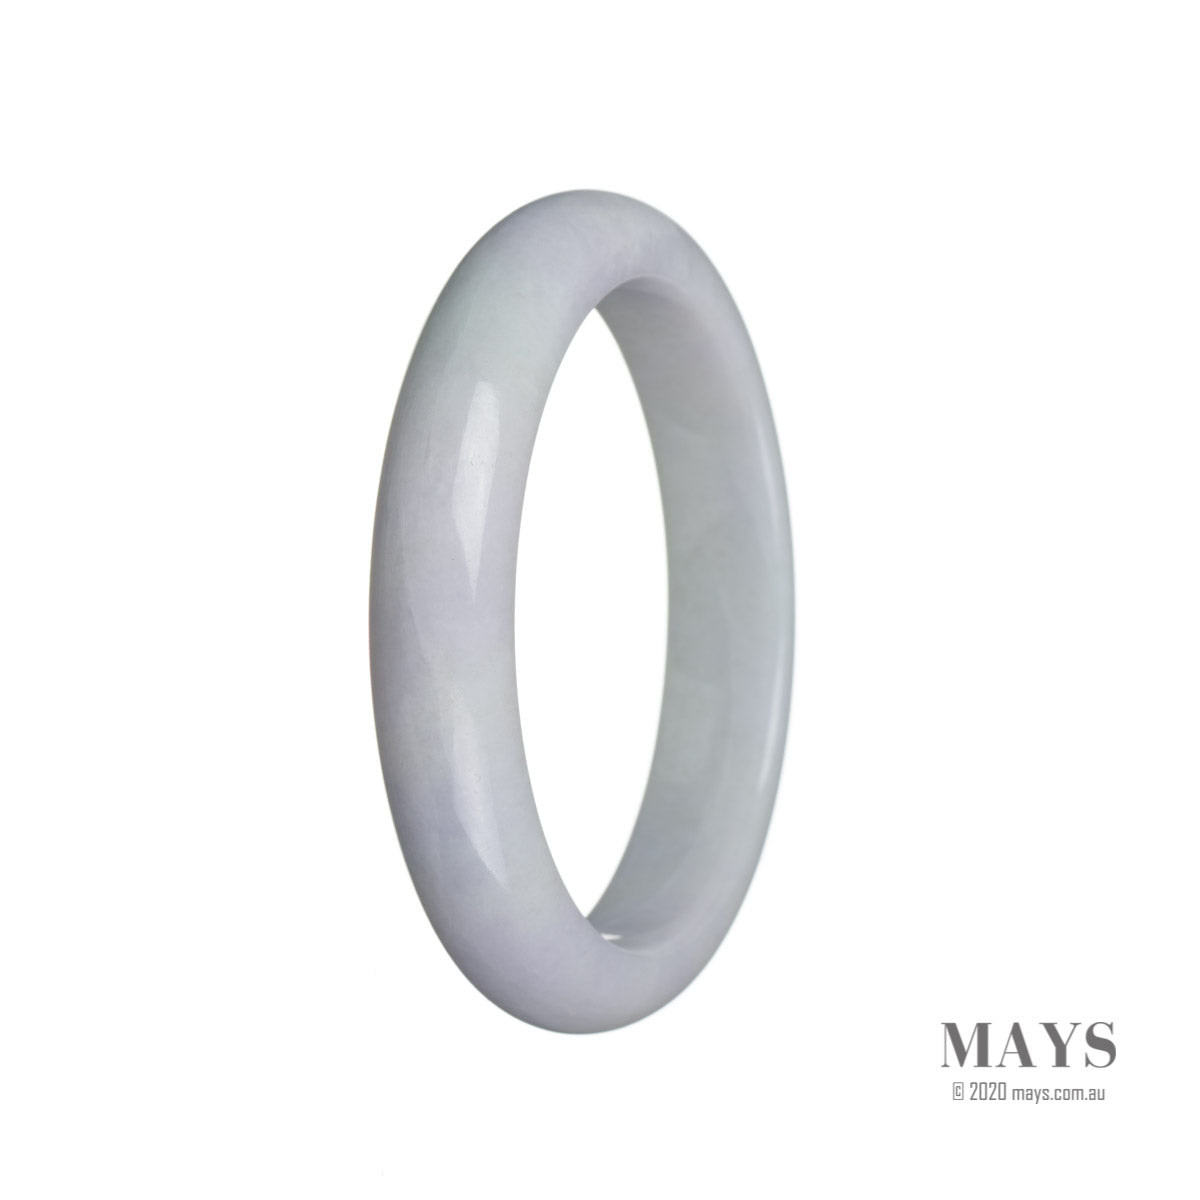 A close-up image of a genuine Type A white jade bangle with hints of pale lavender. It has a semi-round shape and measures 60mm in diameter. The bangle is from the brand MAYS.